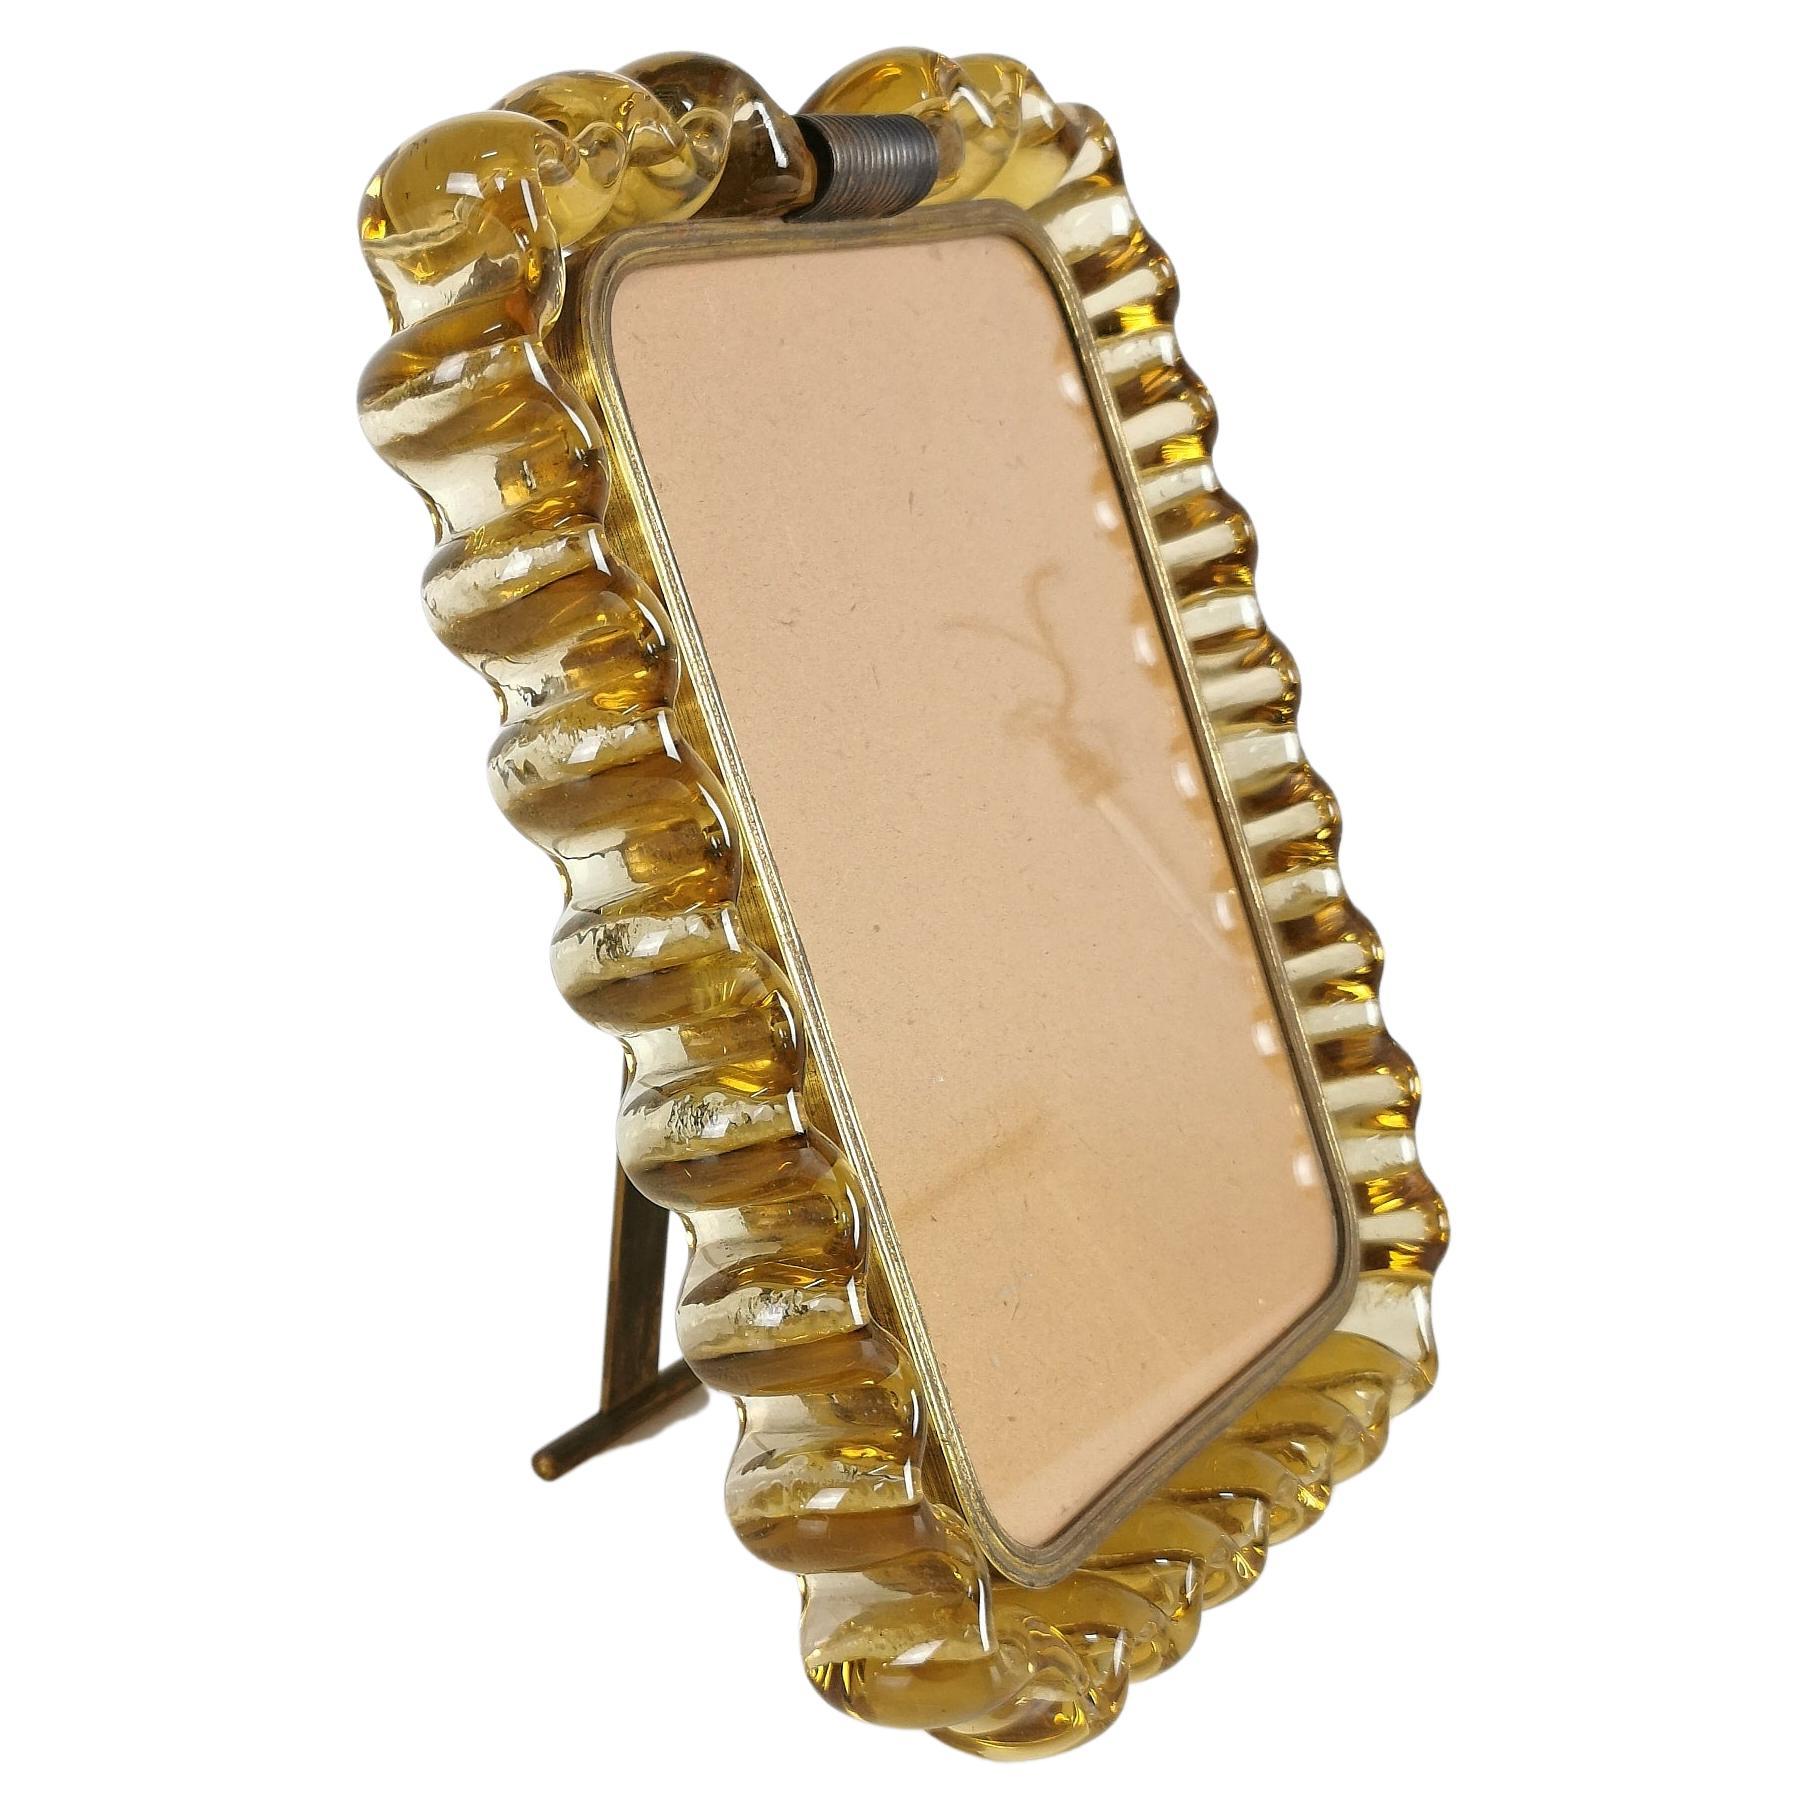 Picture Frame Murano Glass Brass Venini Decorative Object Midcentury Italy 1940s